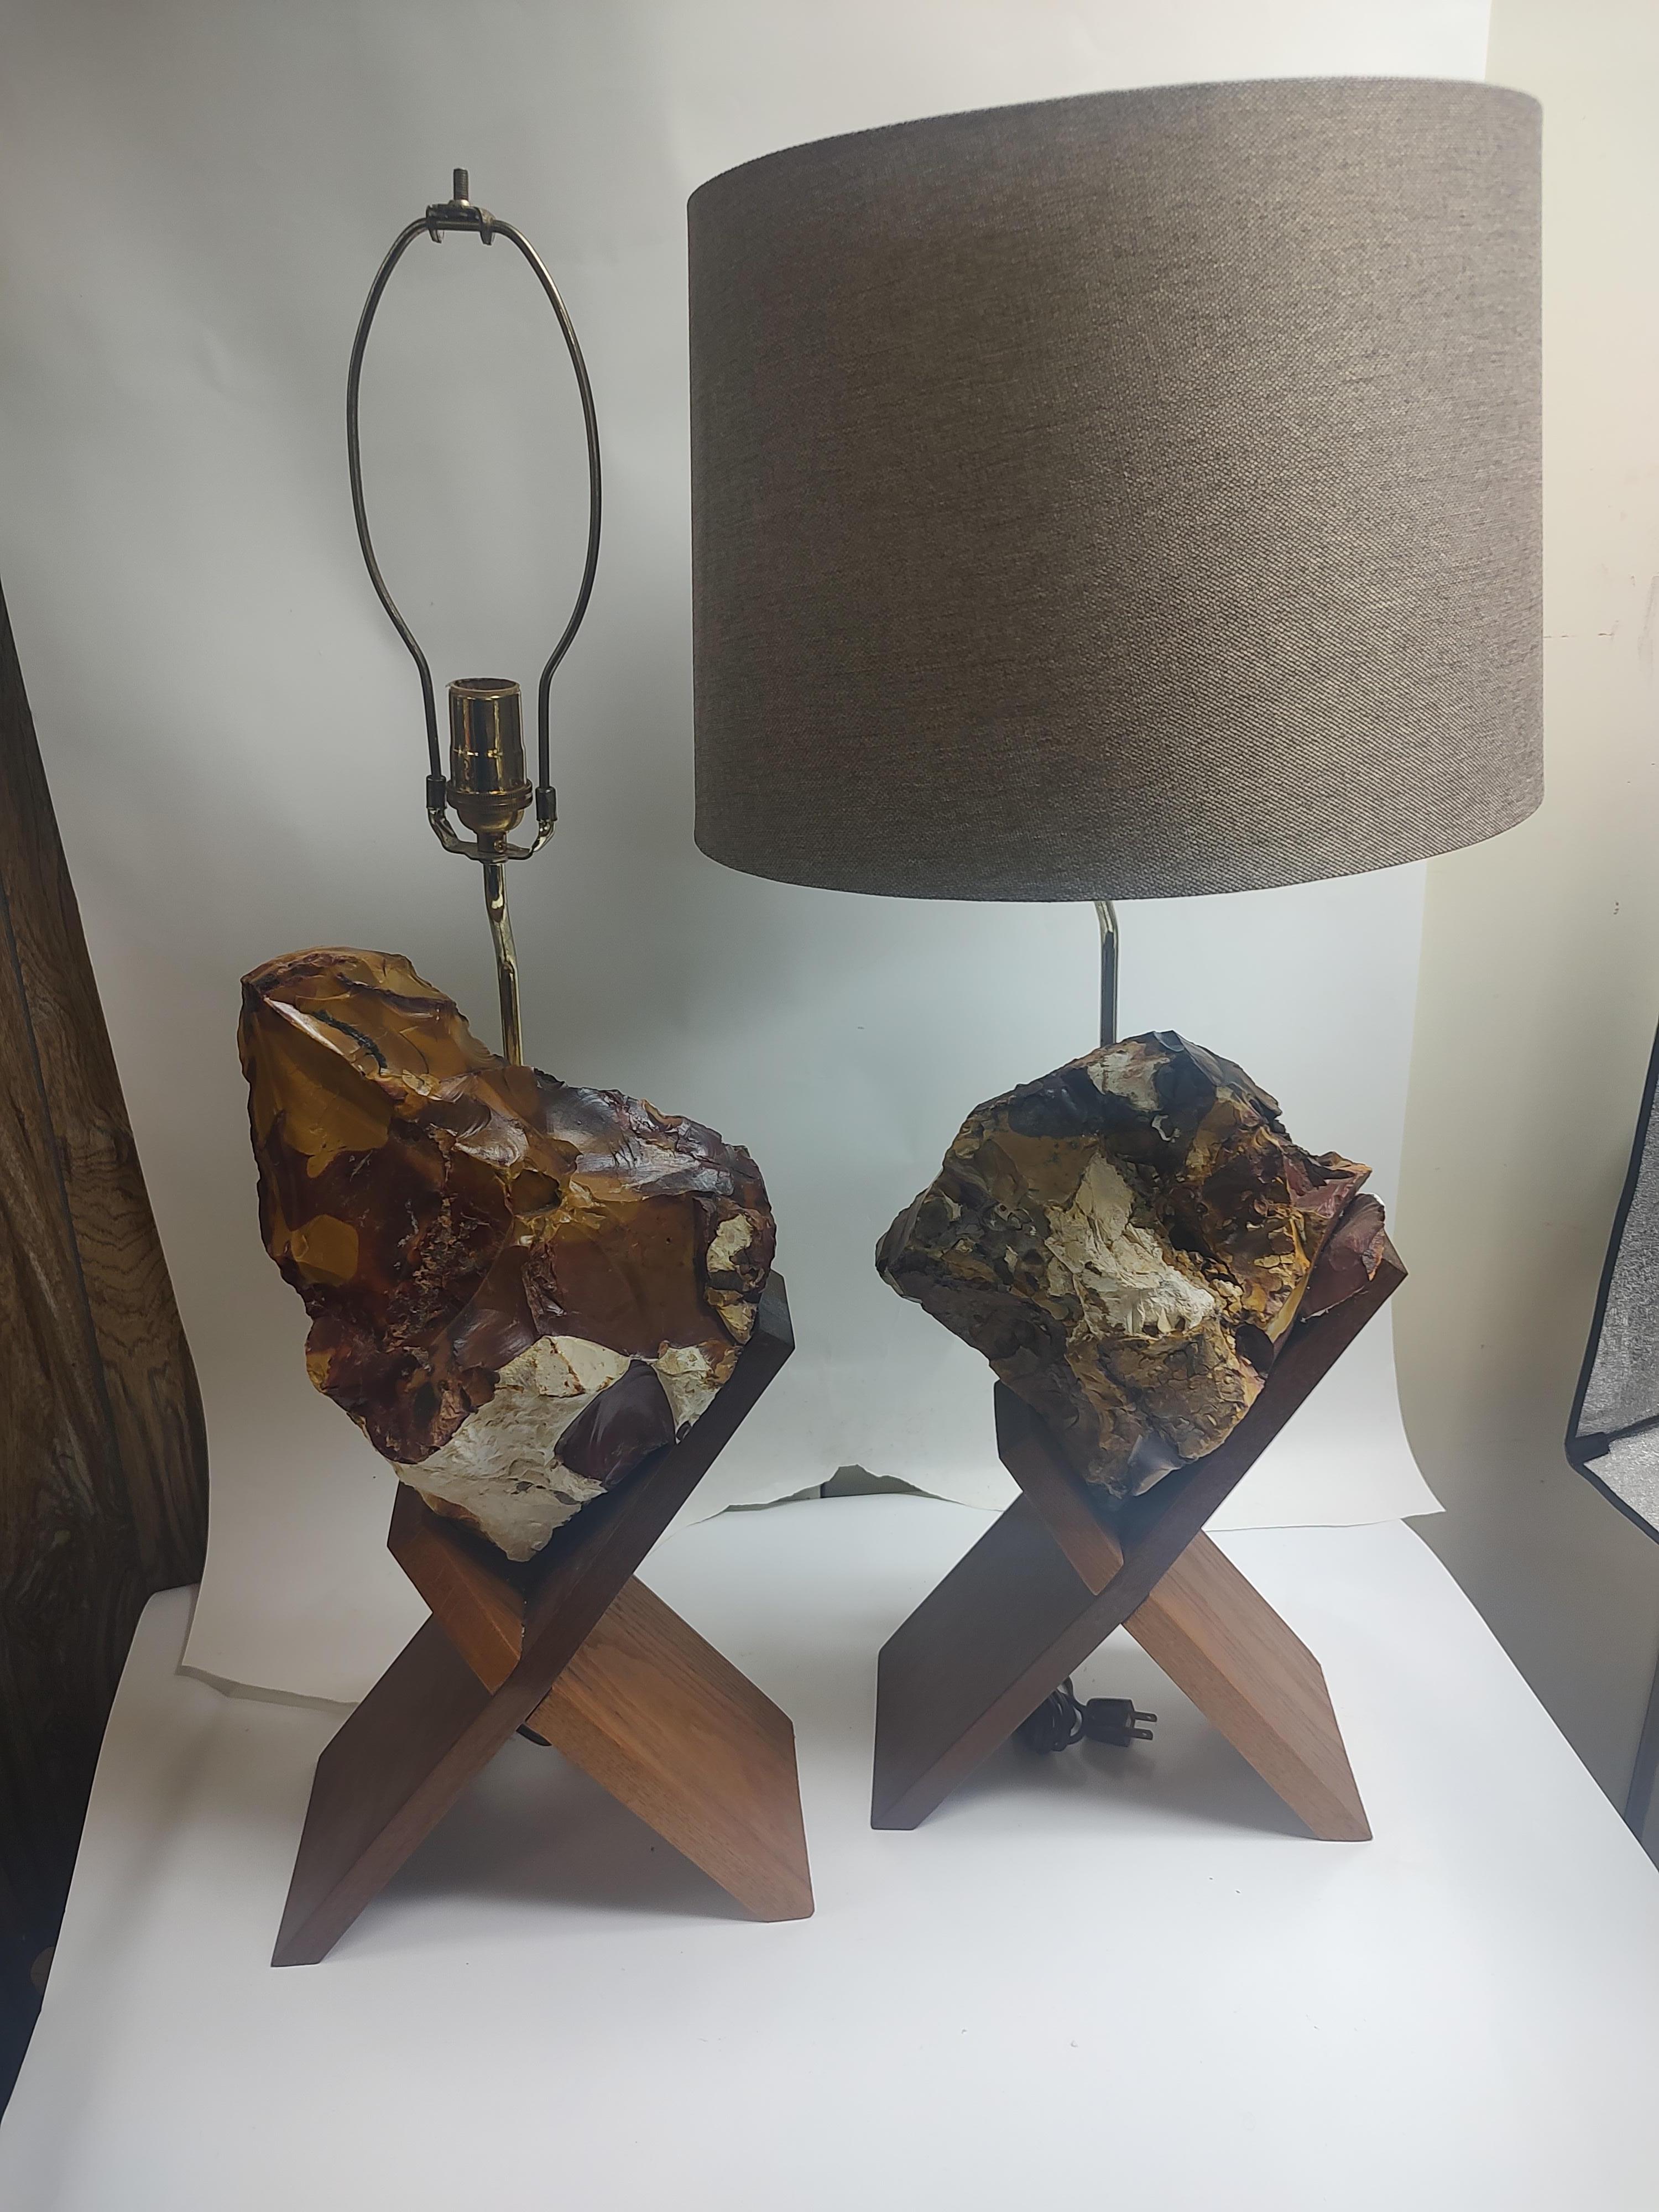 Pair of Mid Century Modern Sculptural Raw Onyx & Teak Table Lamps For Sale 2